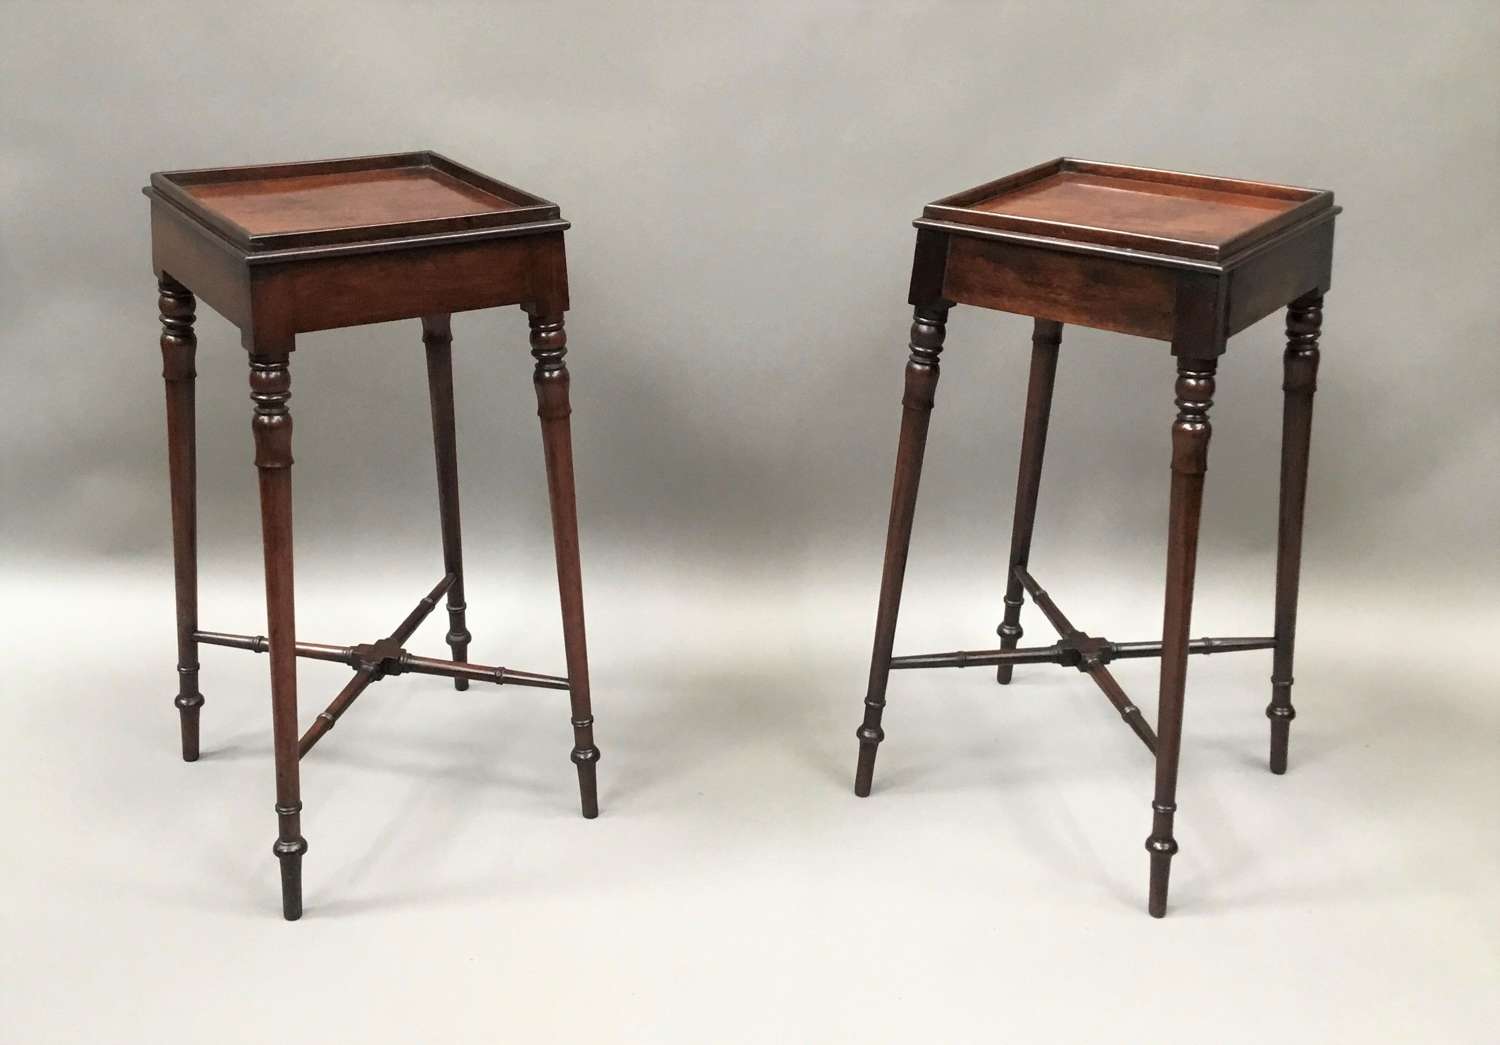 Pair of Regency mahogany occasional tables / urn stands